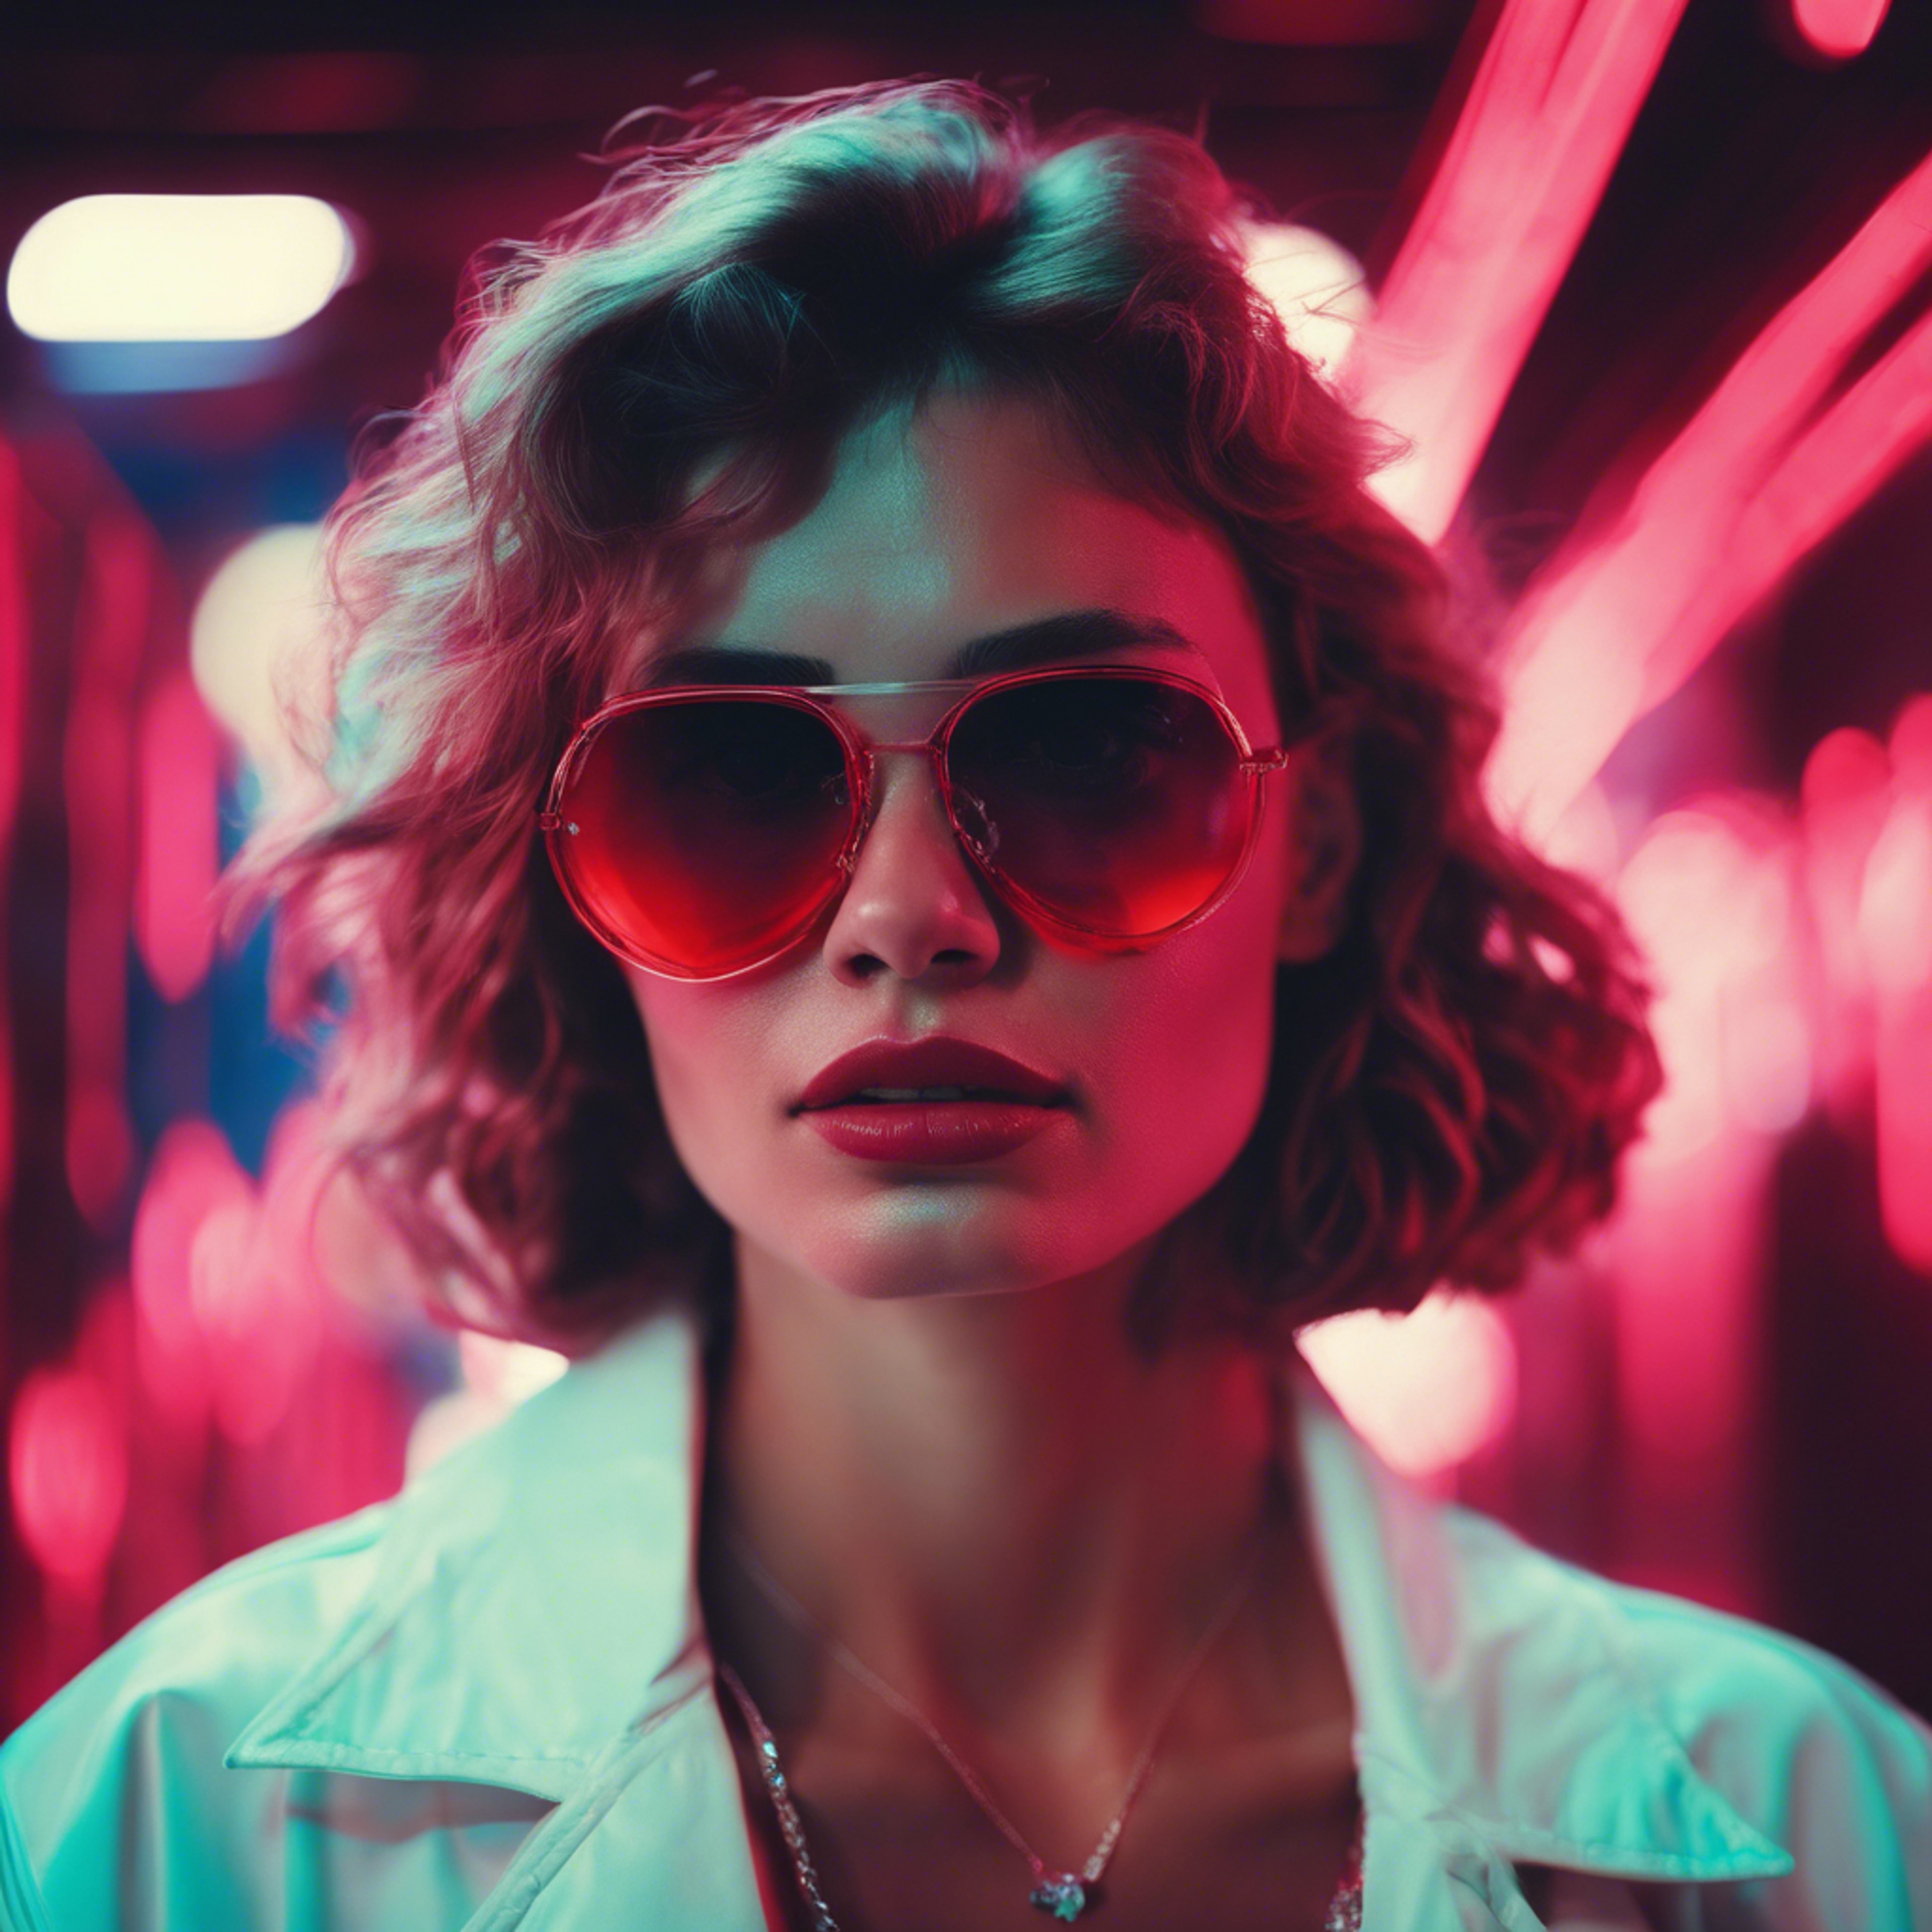 Retro 80's style portrait of a woman in sunglasses lit by cool red neon lights. Tapeta[9fb655559f07479e9c29]